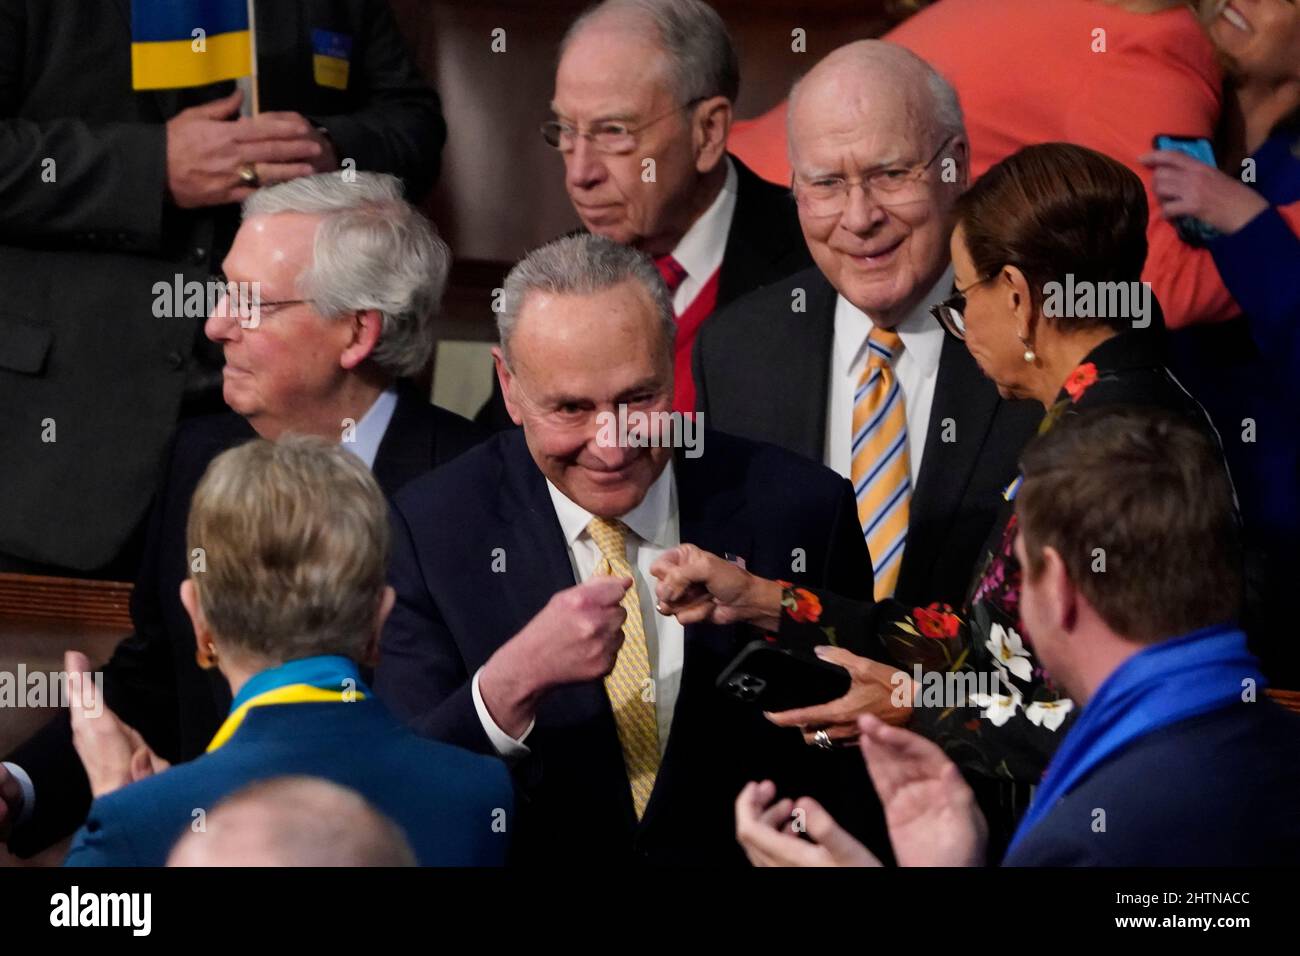 Senate Majority Leader Chuck Schumer of N.Y., along with Sen. Patrick Leahy, D-Vt., Sen. Chuck Grassley, R-Iowa, and Senate Minority Leader Mitch McConnell of Ky., arrive before President Joe Biden delivers his first State of the Union address to a joint session of Congress, at the Capitol in Washington, Tuesday, March 1, 2022. Credit: J. Scott Applewhite/Pool via CNP /MediaPunch Stock Photo